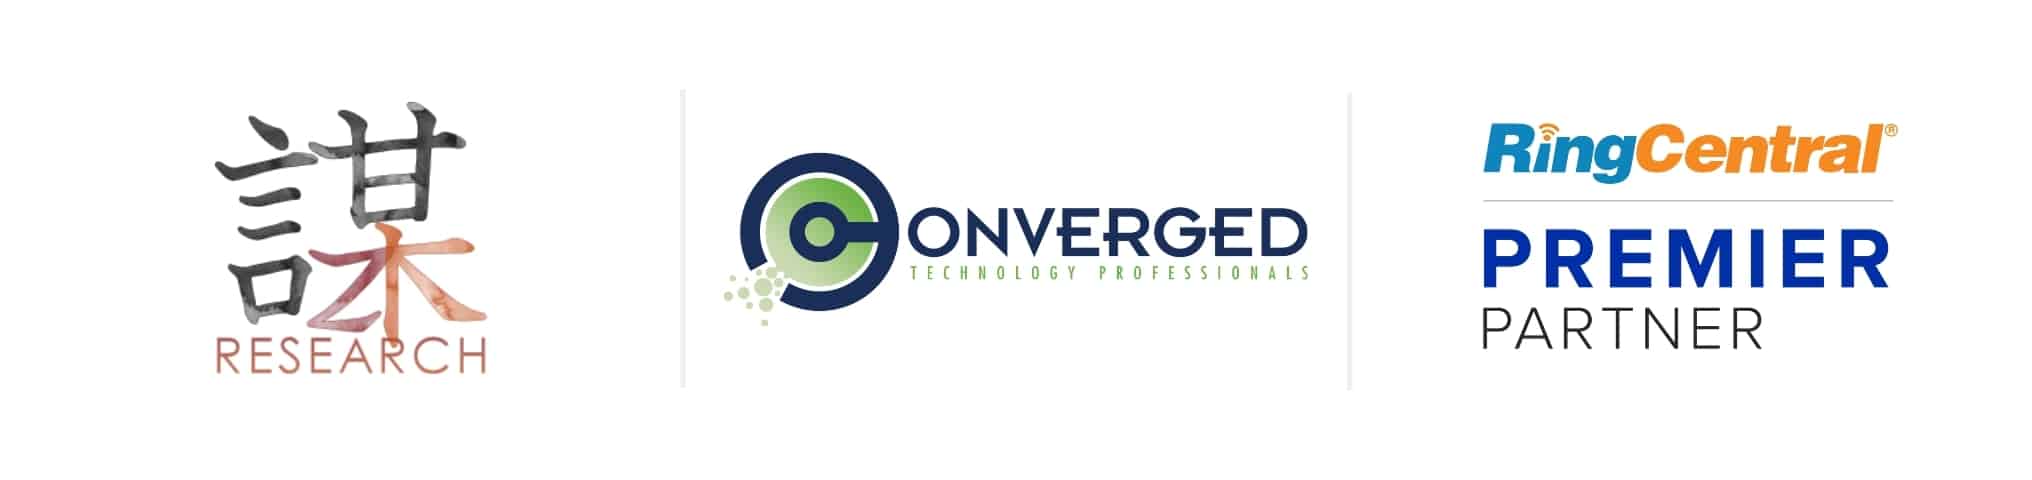 ZK Research | Converged | RingCentral